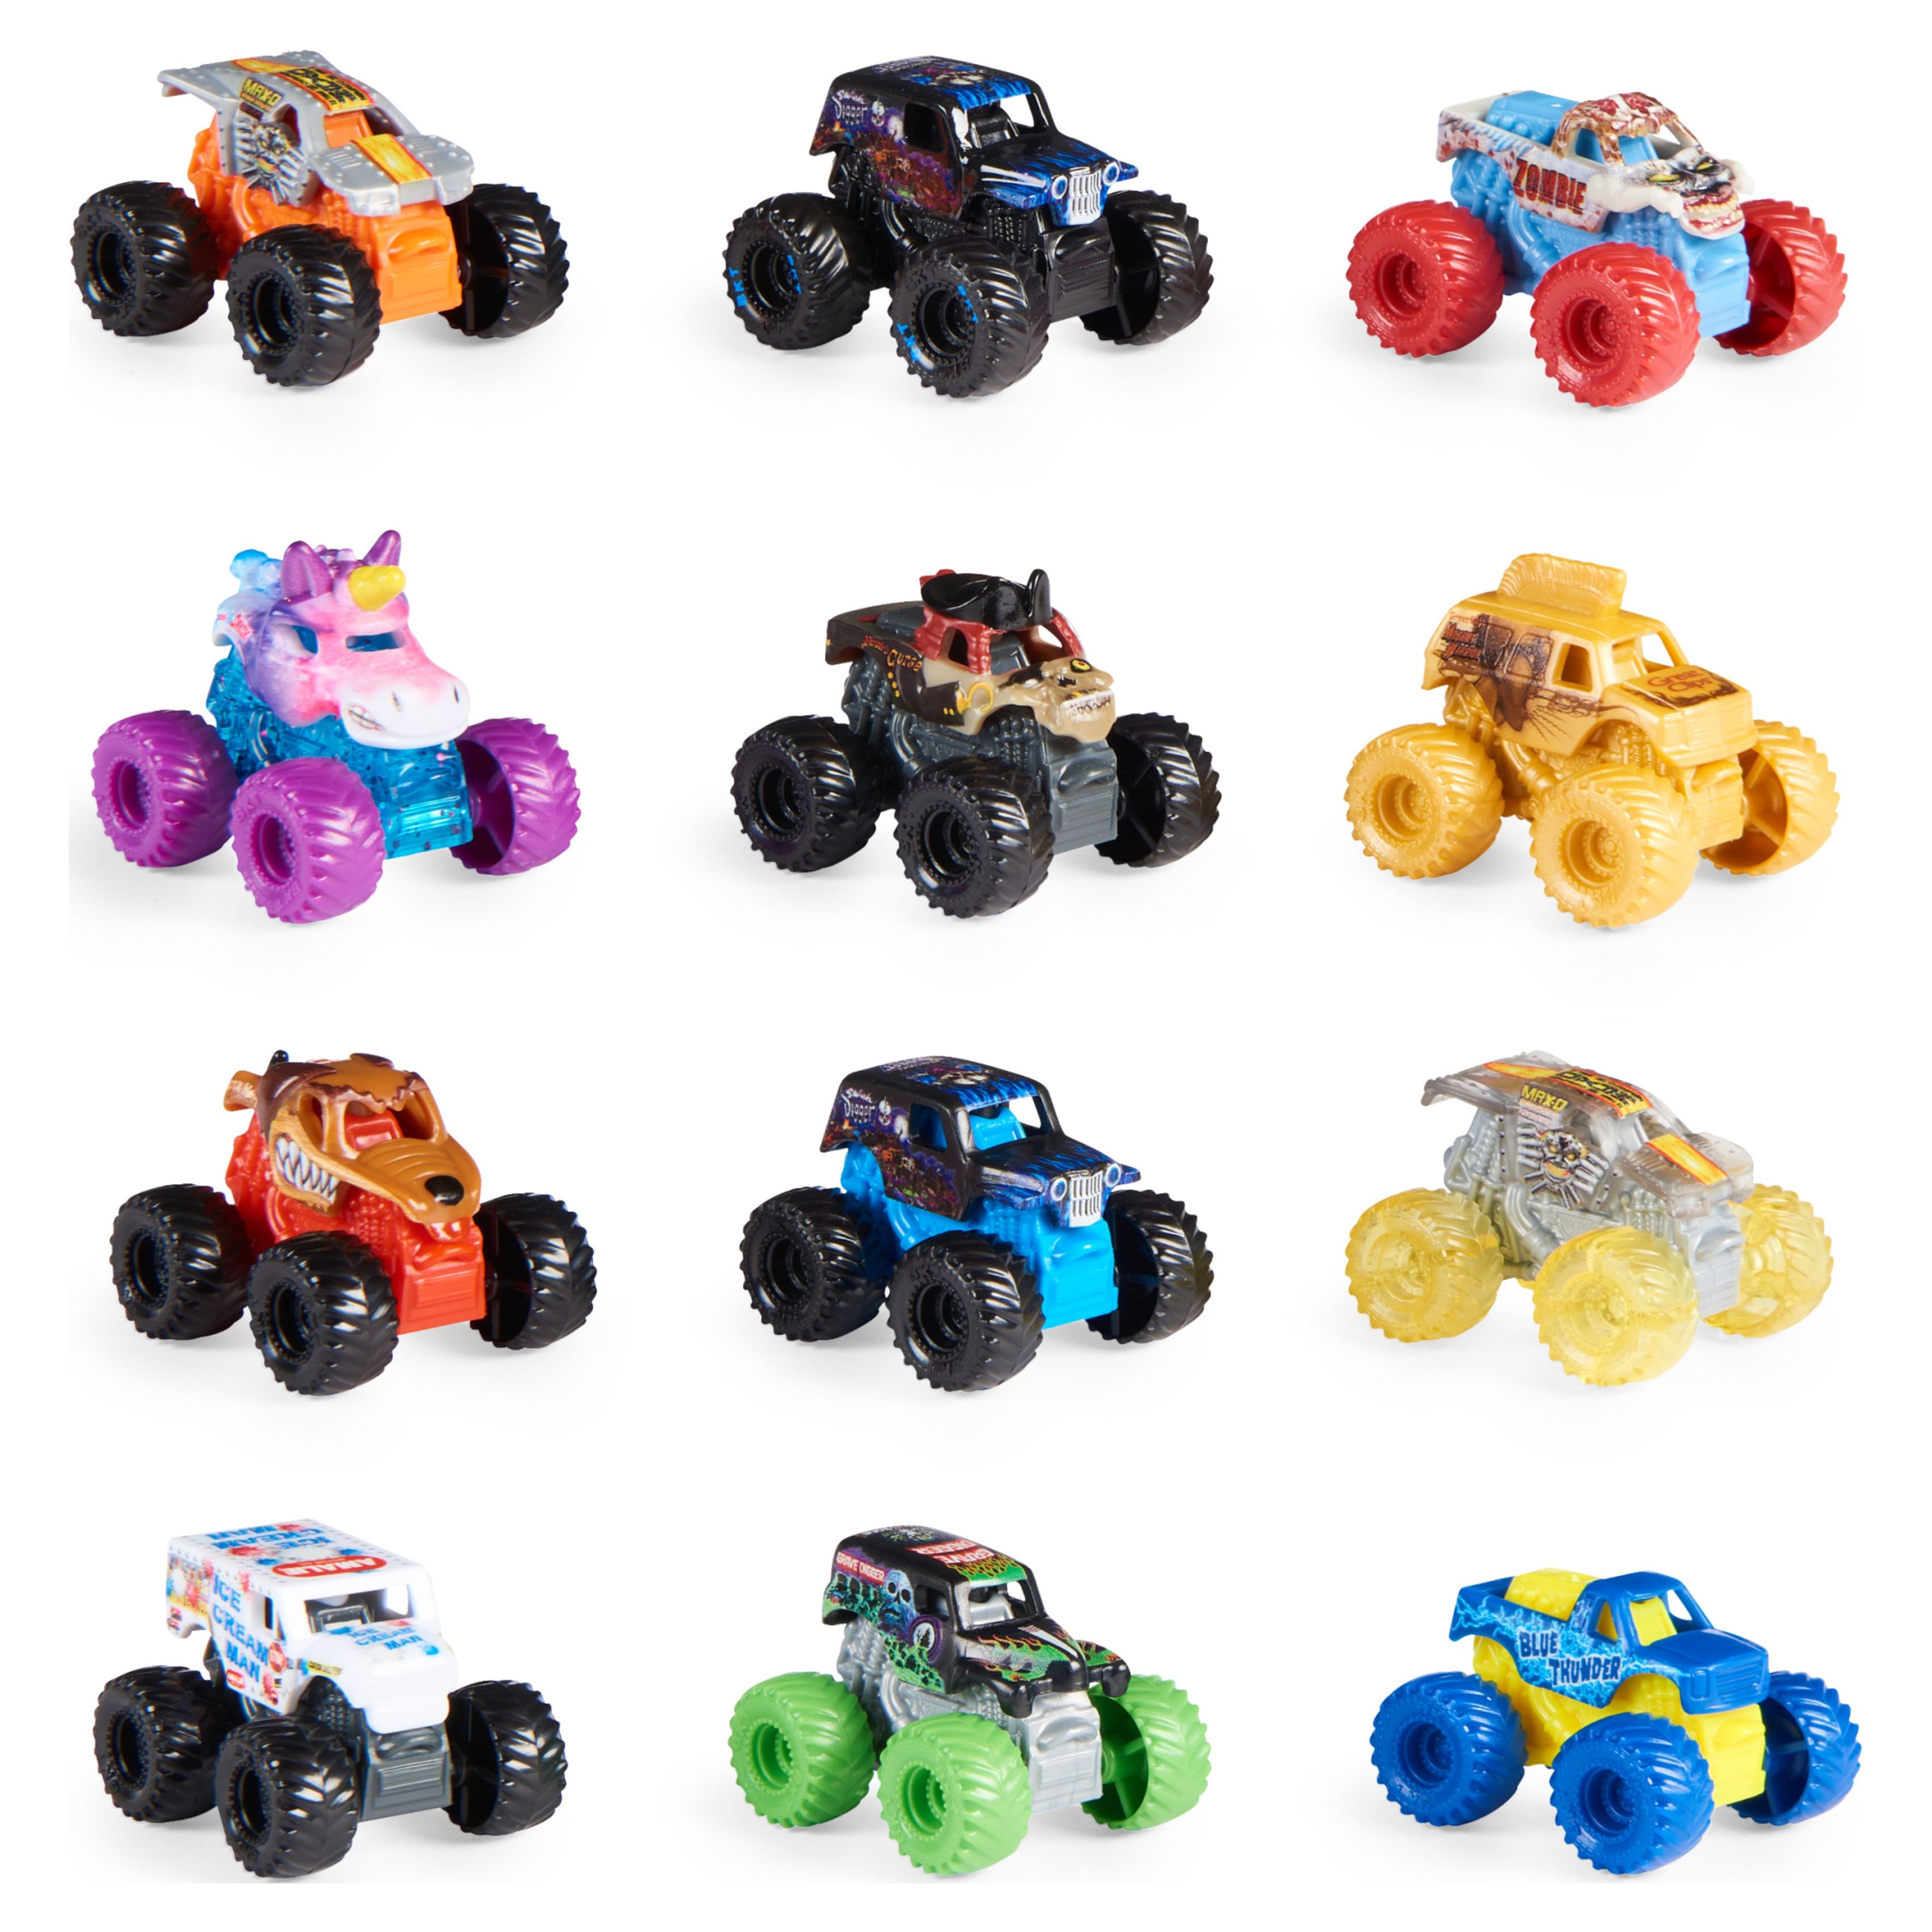 Monster Jam, Official Mini Mystery Collectible Monster Truck (Styles May  Vary), 1:87 Scale